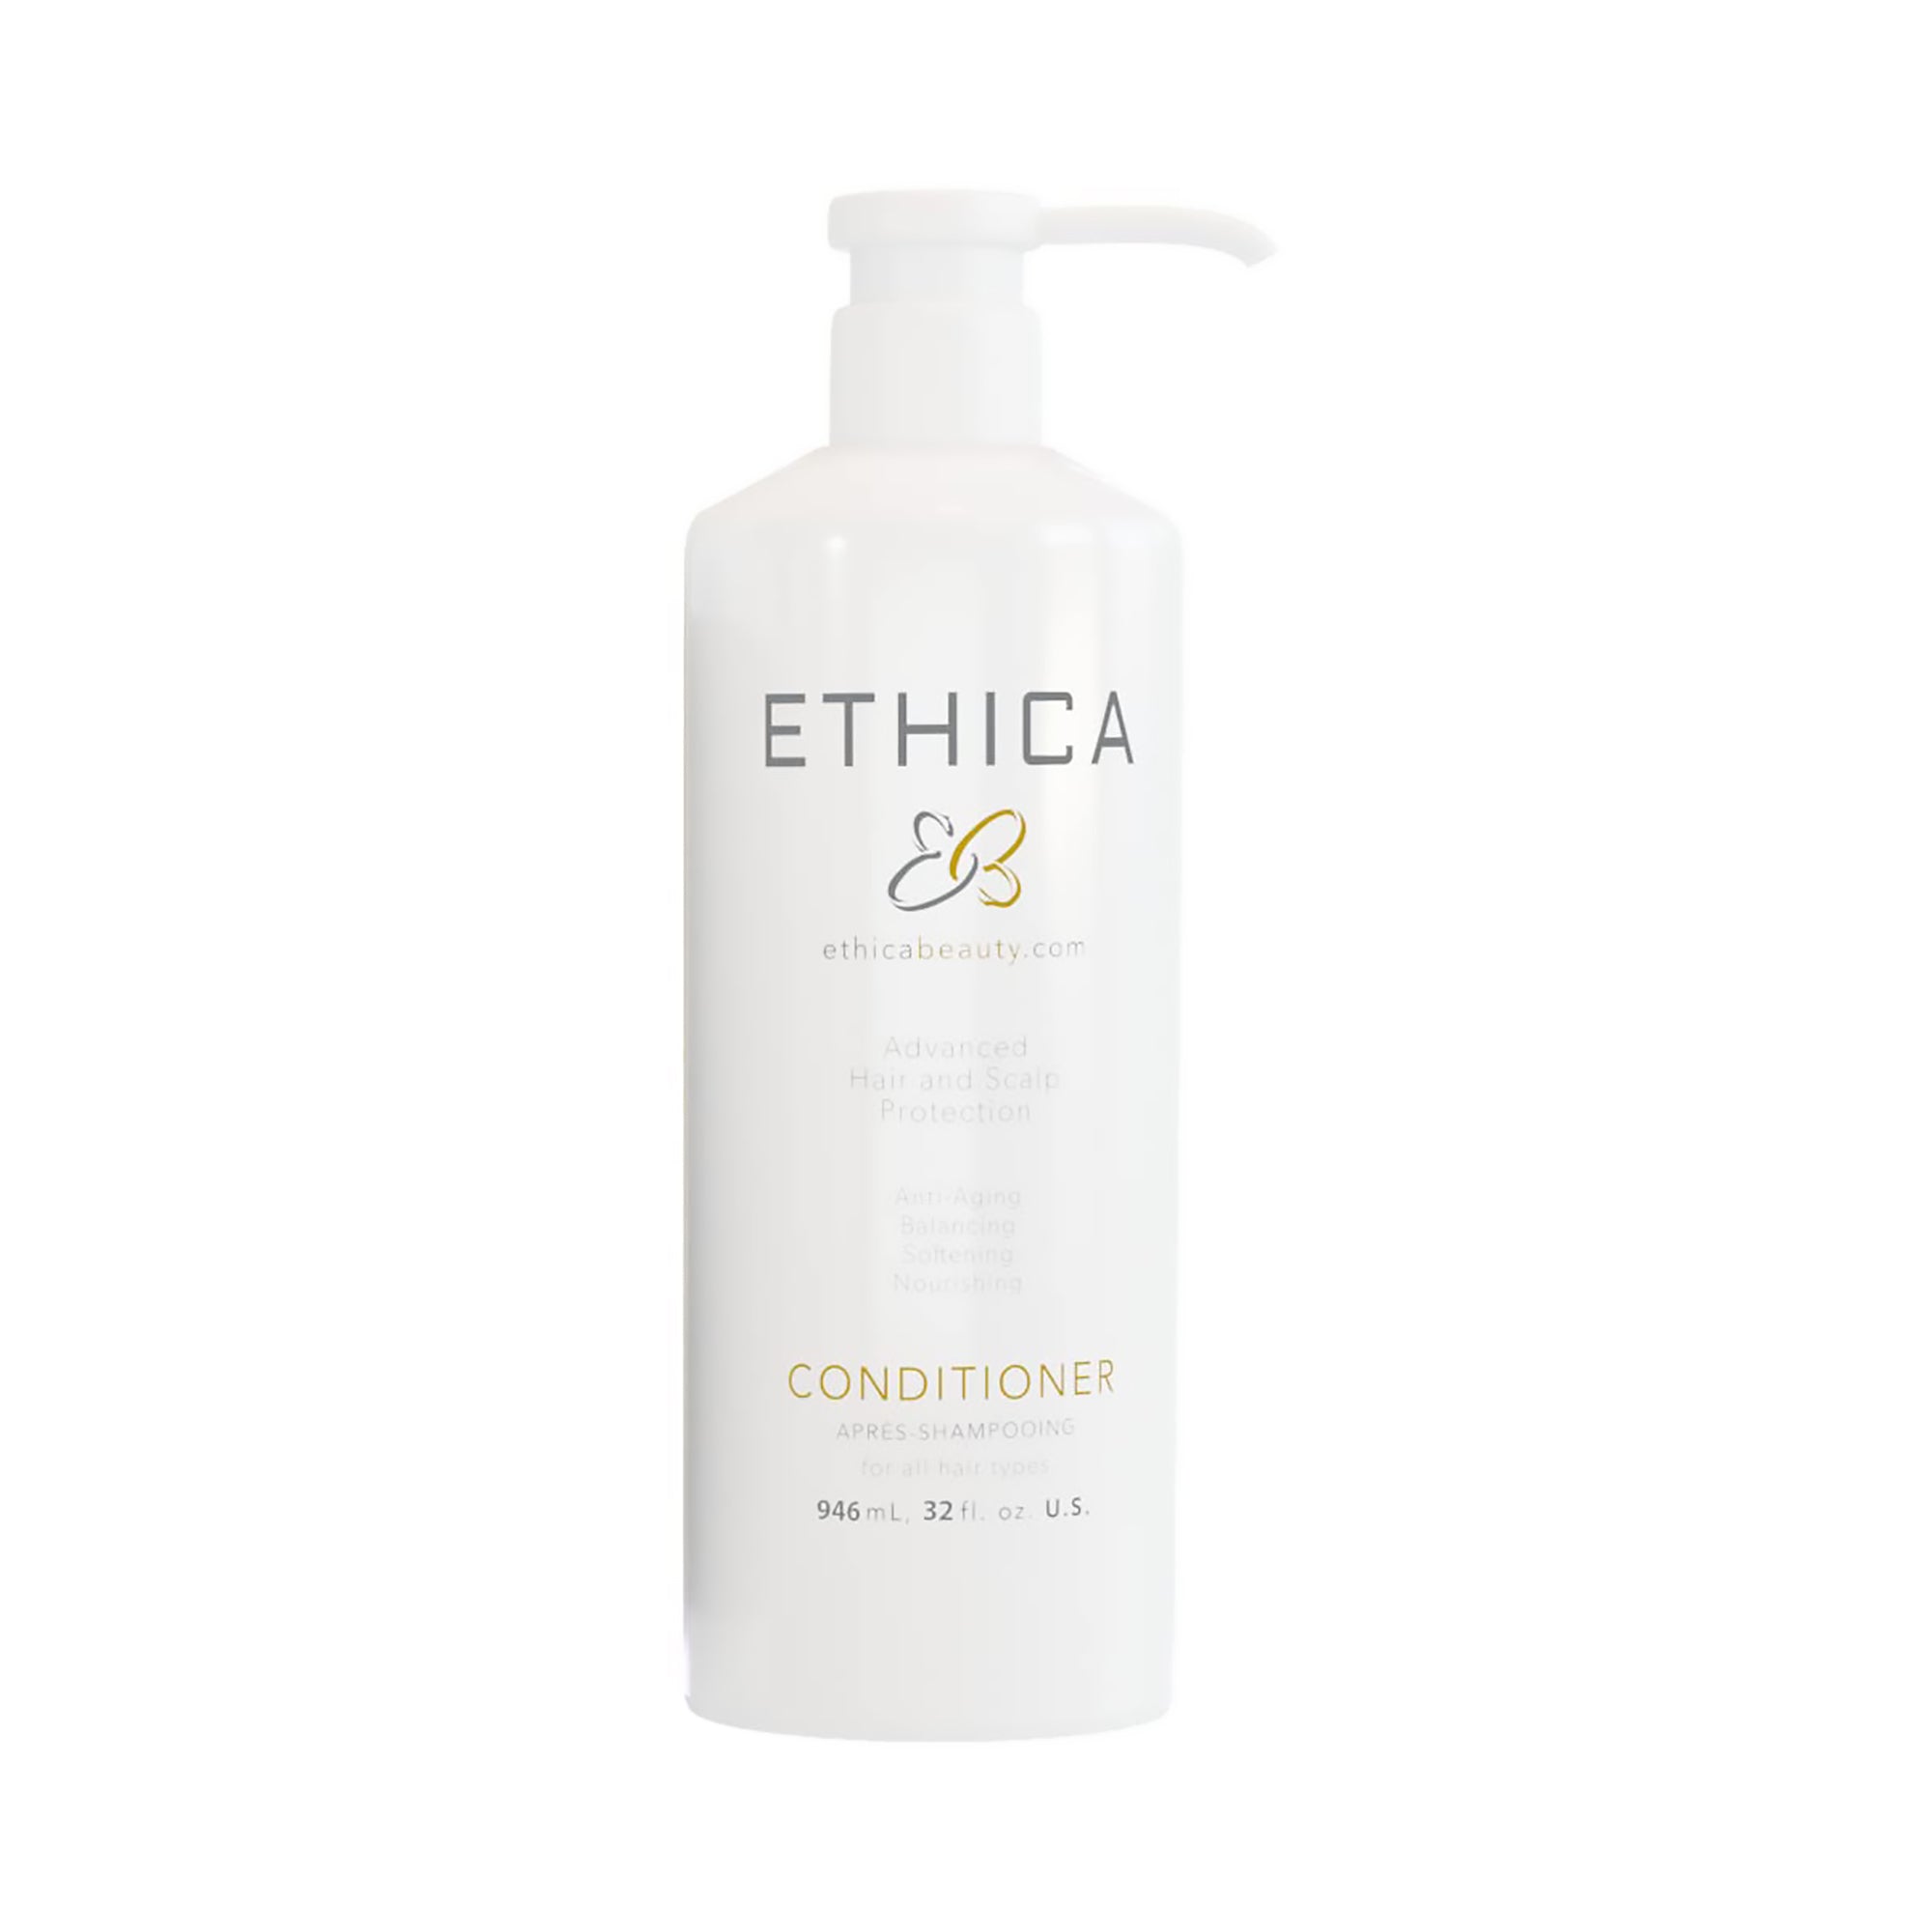 Ethica Beauty Energizing Anti-Aging Protective Daily Conditioner / 33.8